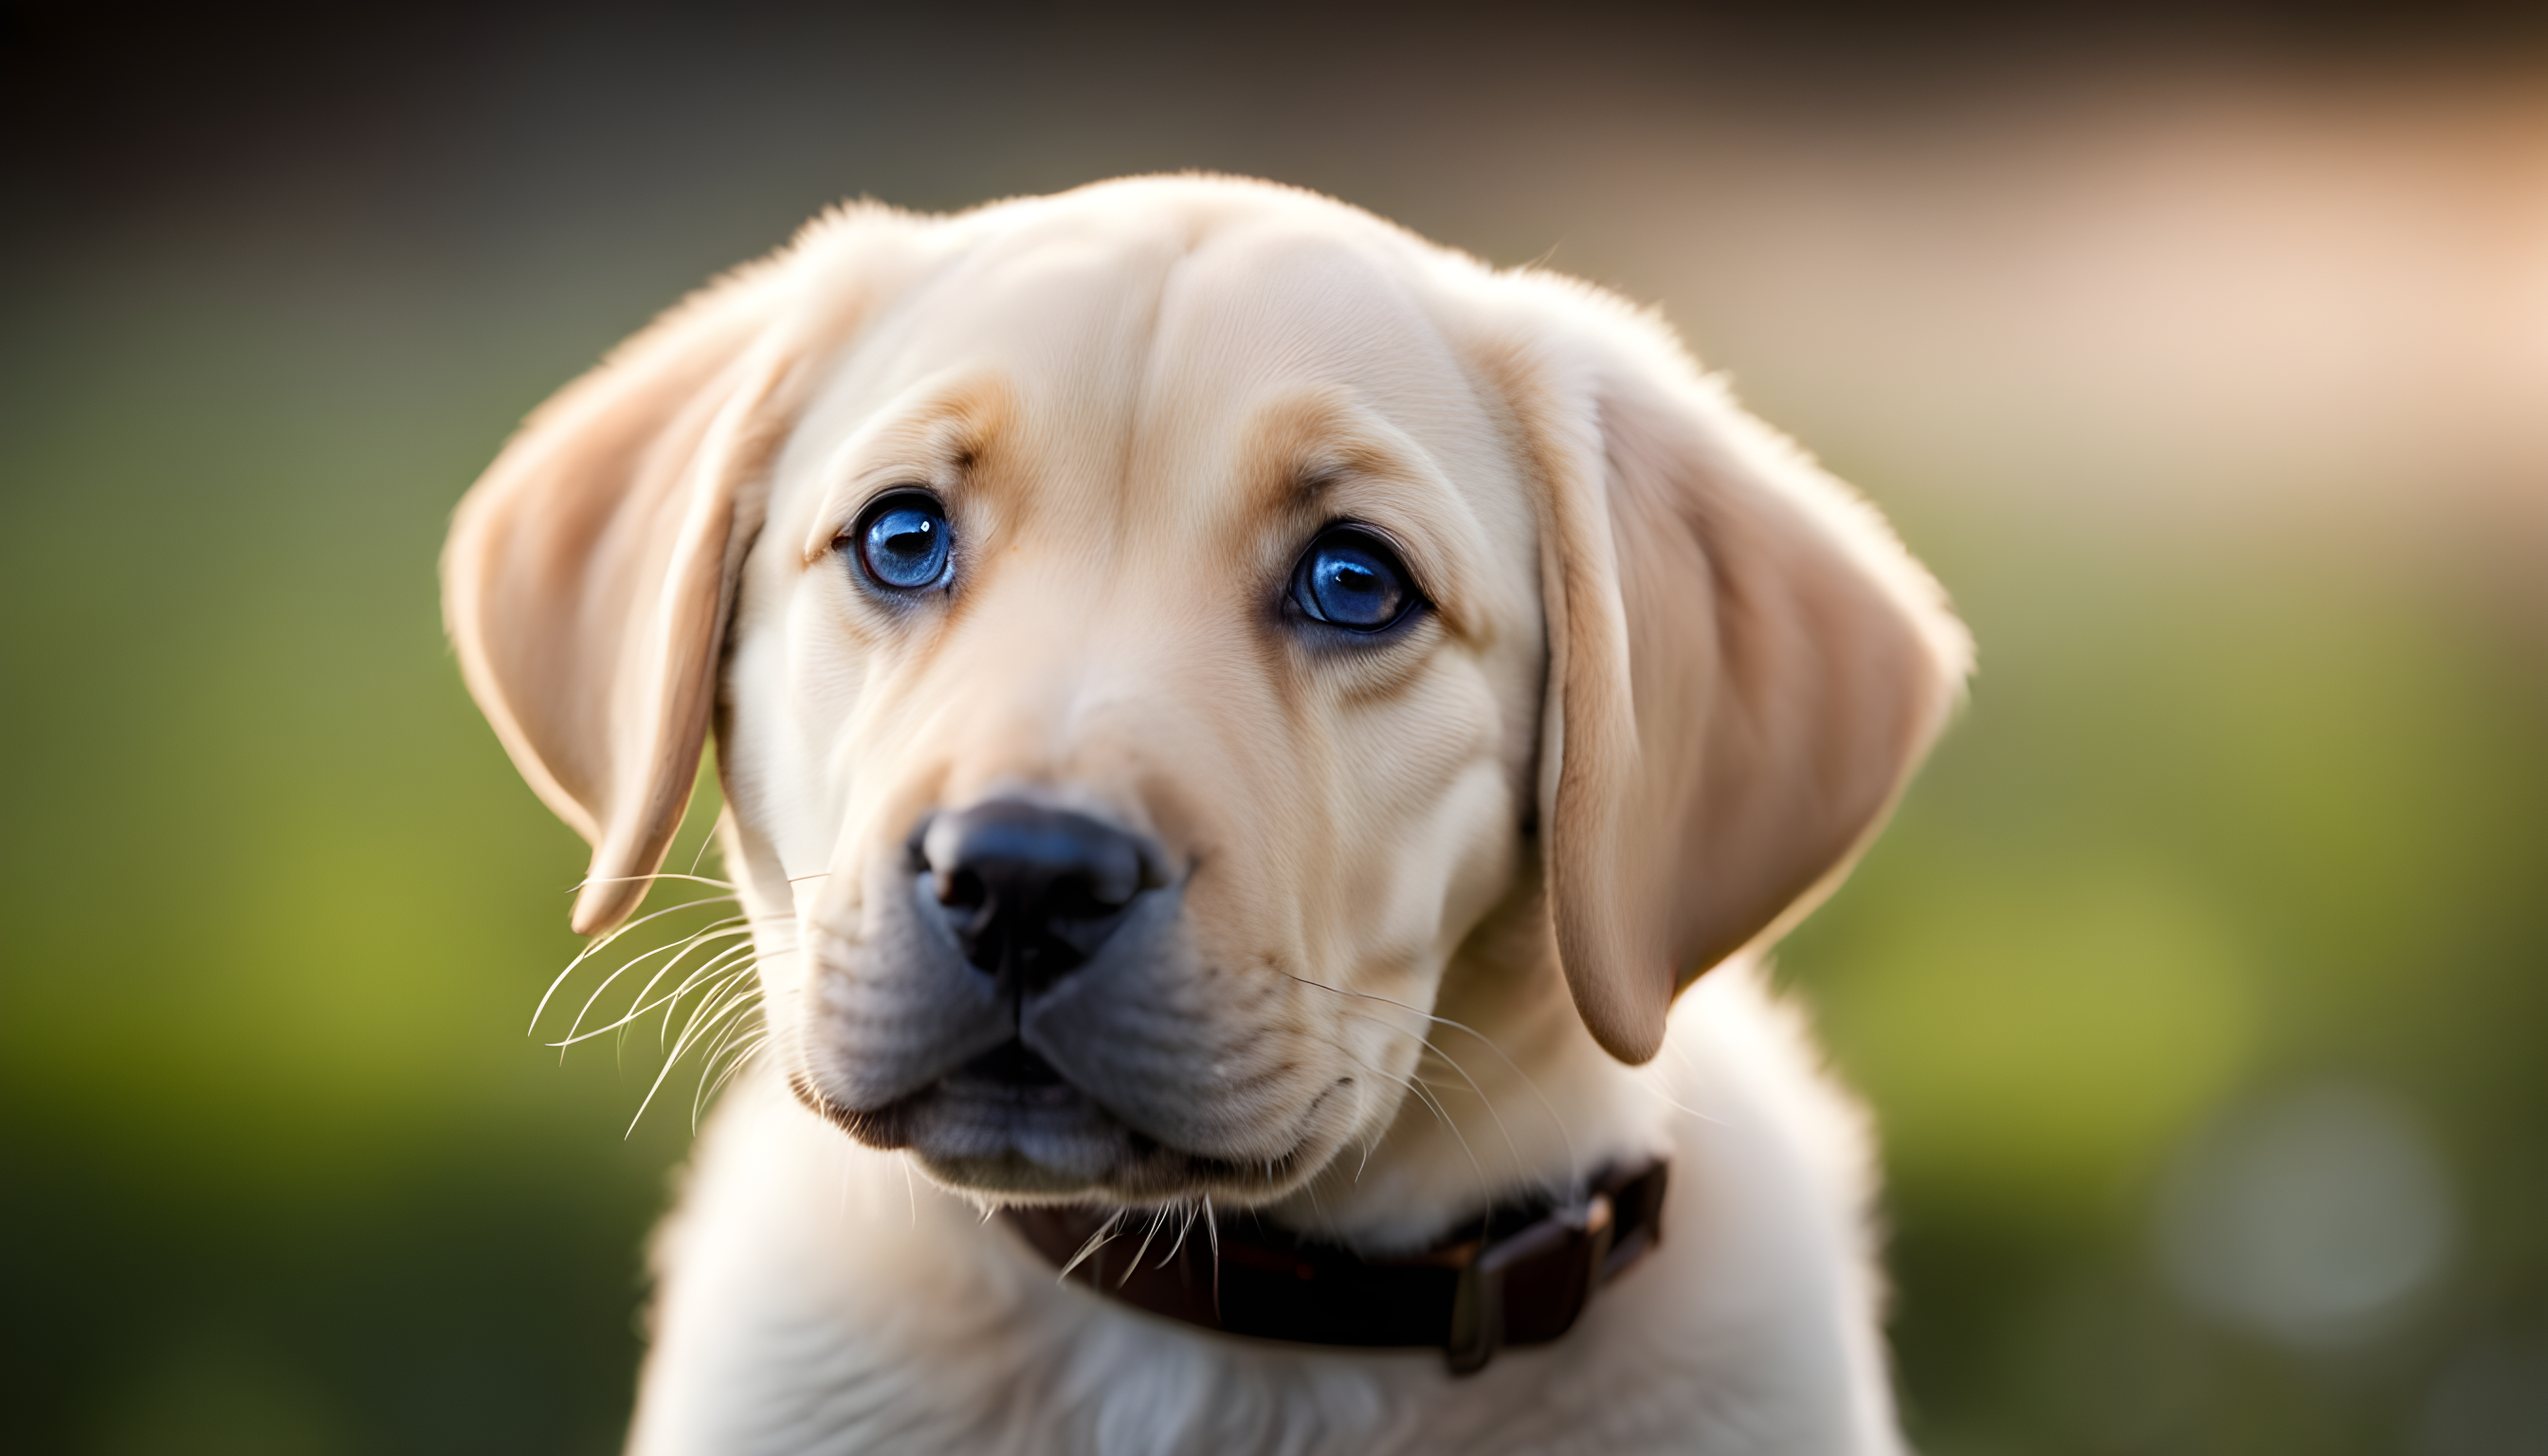 Adorable British Lab puppy staring longingly into the camera, practically begging you to take it home.